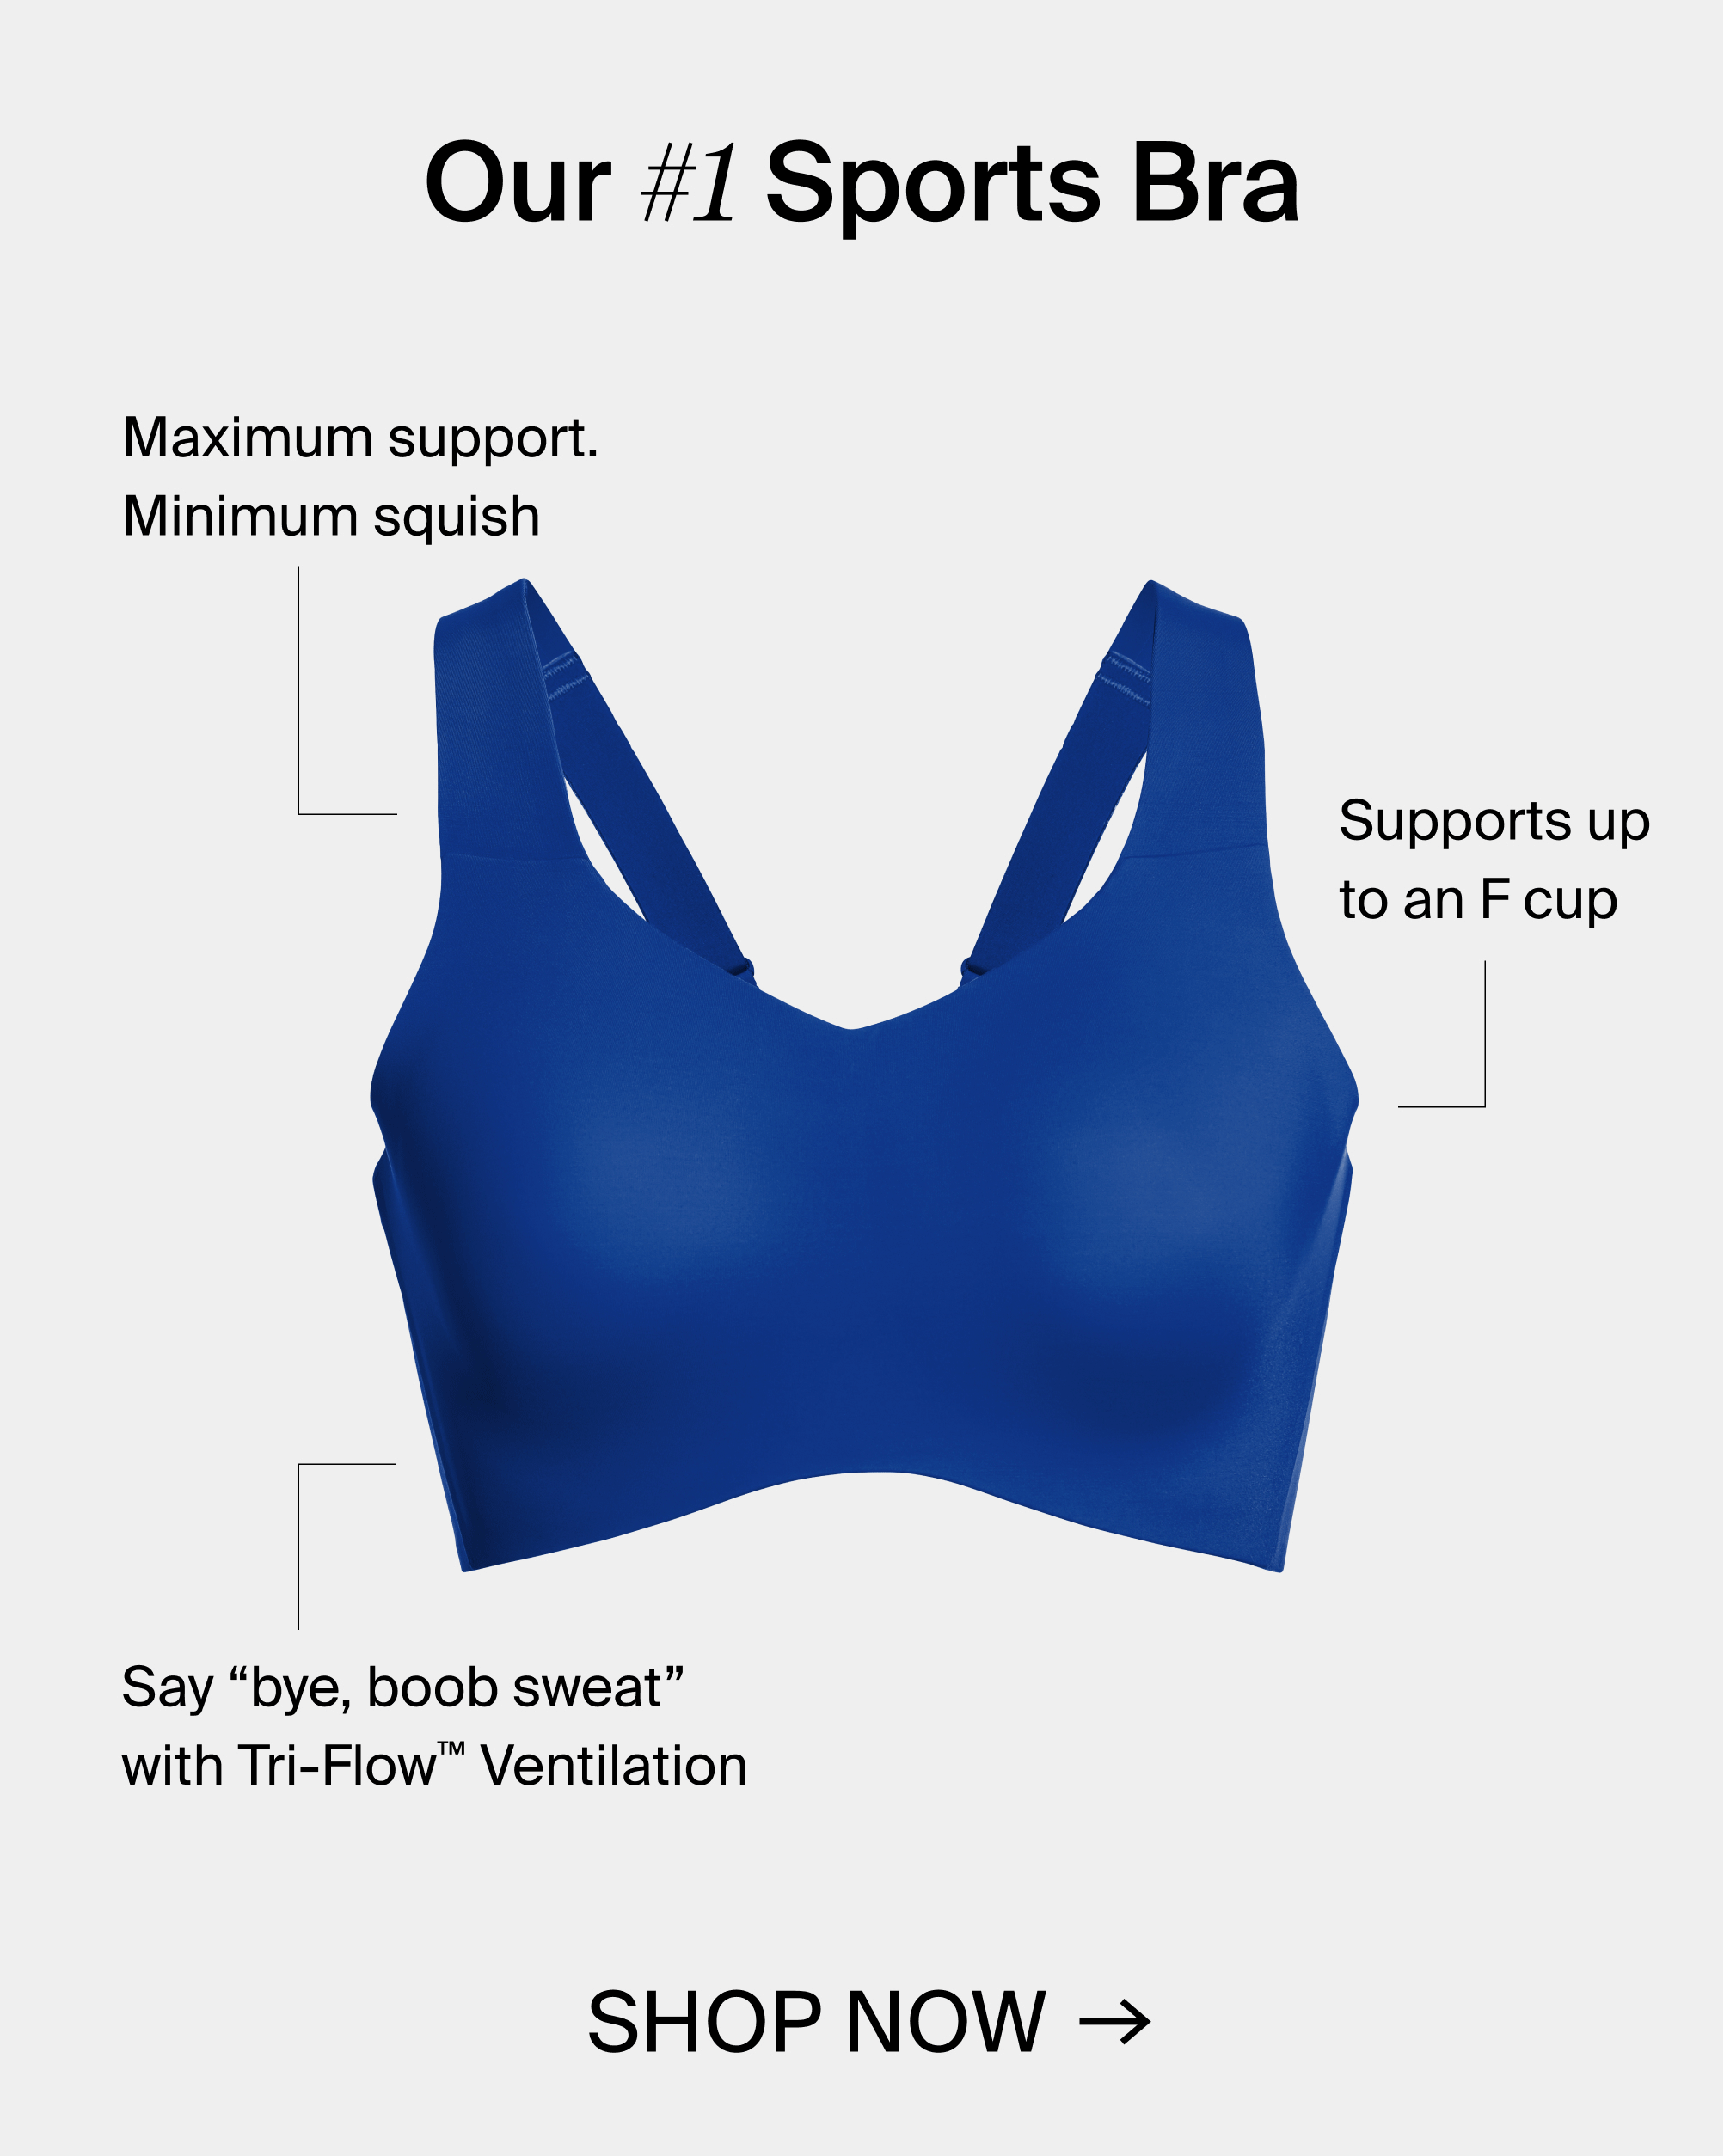 Knix: Still wearing sports bras that give you uniboob?